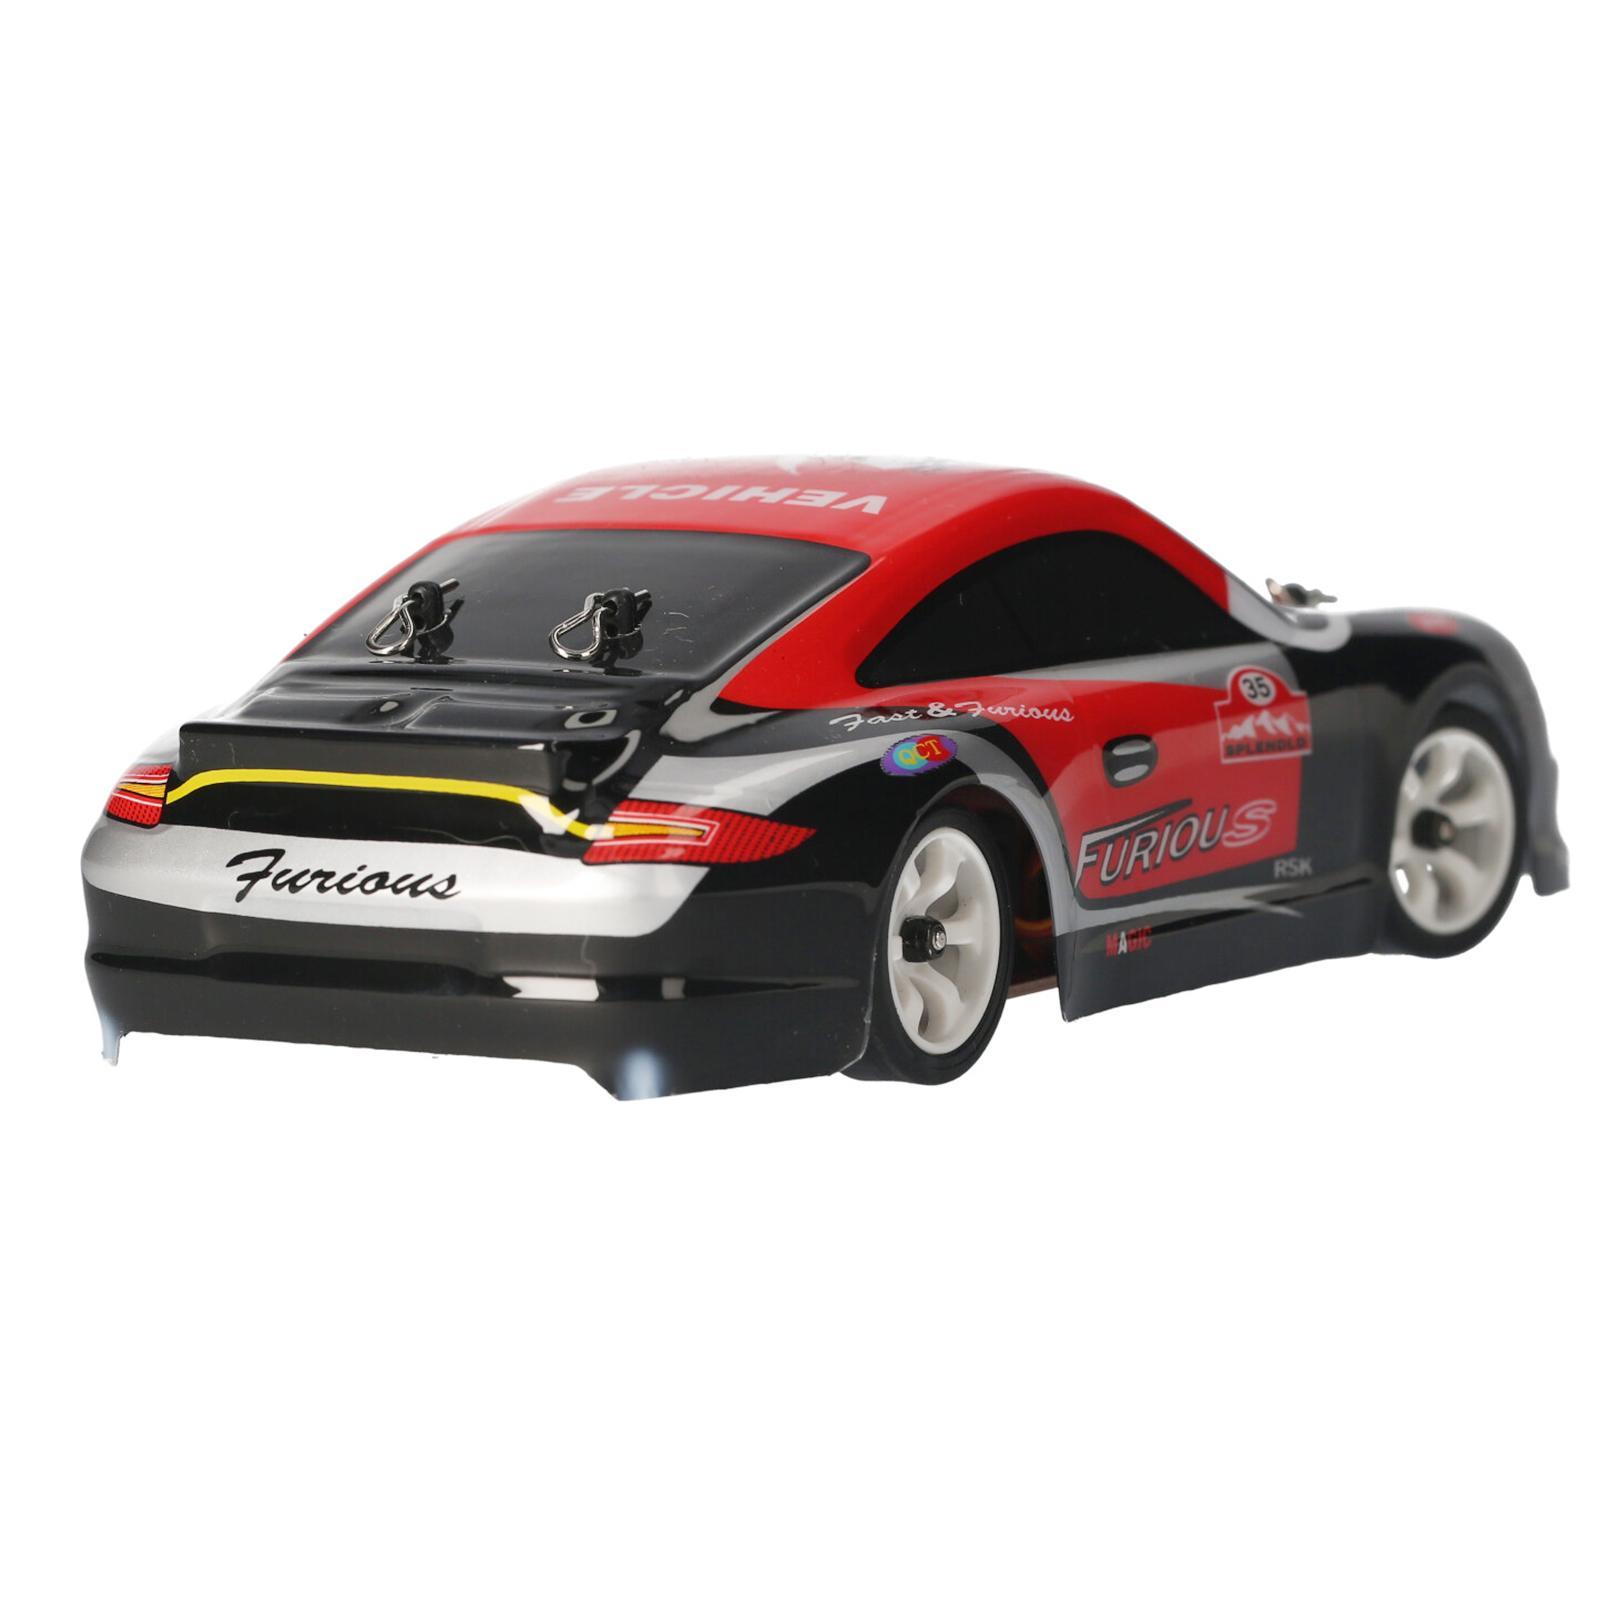 K969 Rc Car: Affordable and Valuable: The k969 RC Car